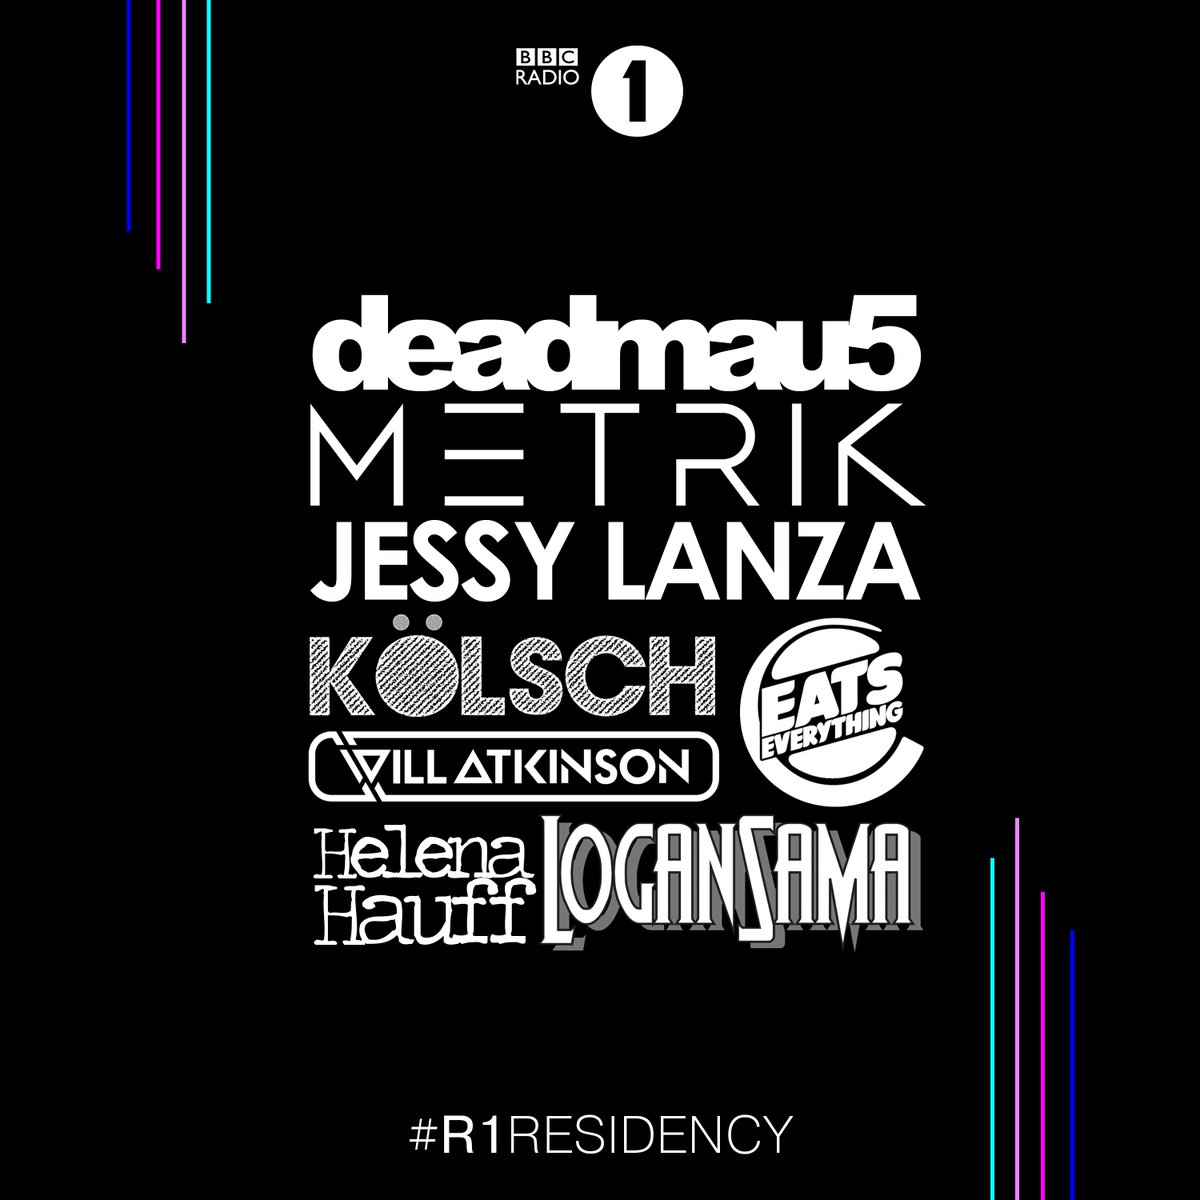 RT @BBCR1: We're very pleased to announce our new lineup for the #R1Residency! https://t.co/Tv32pIlgQw